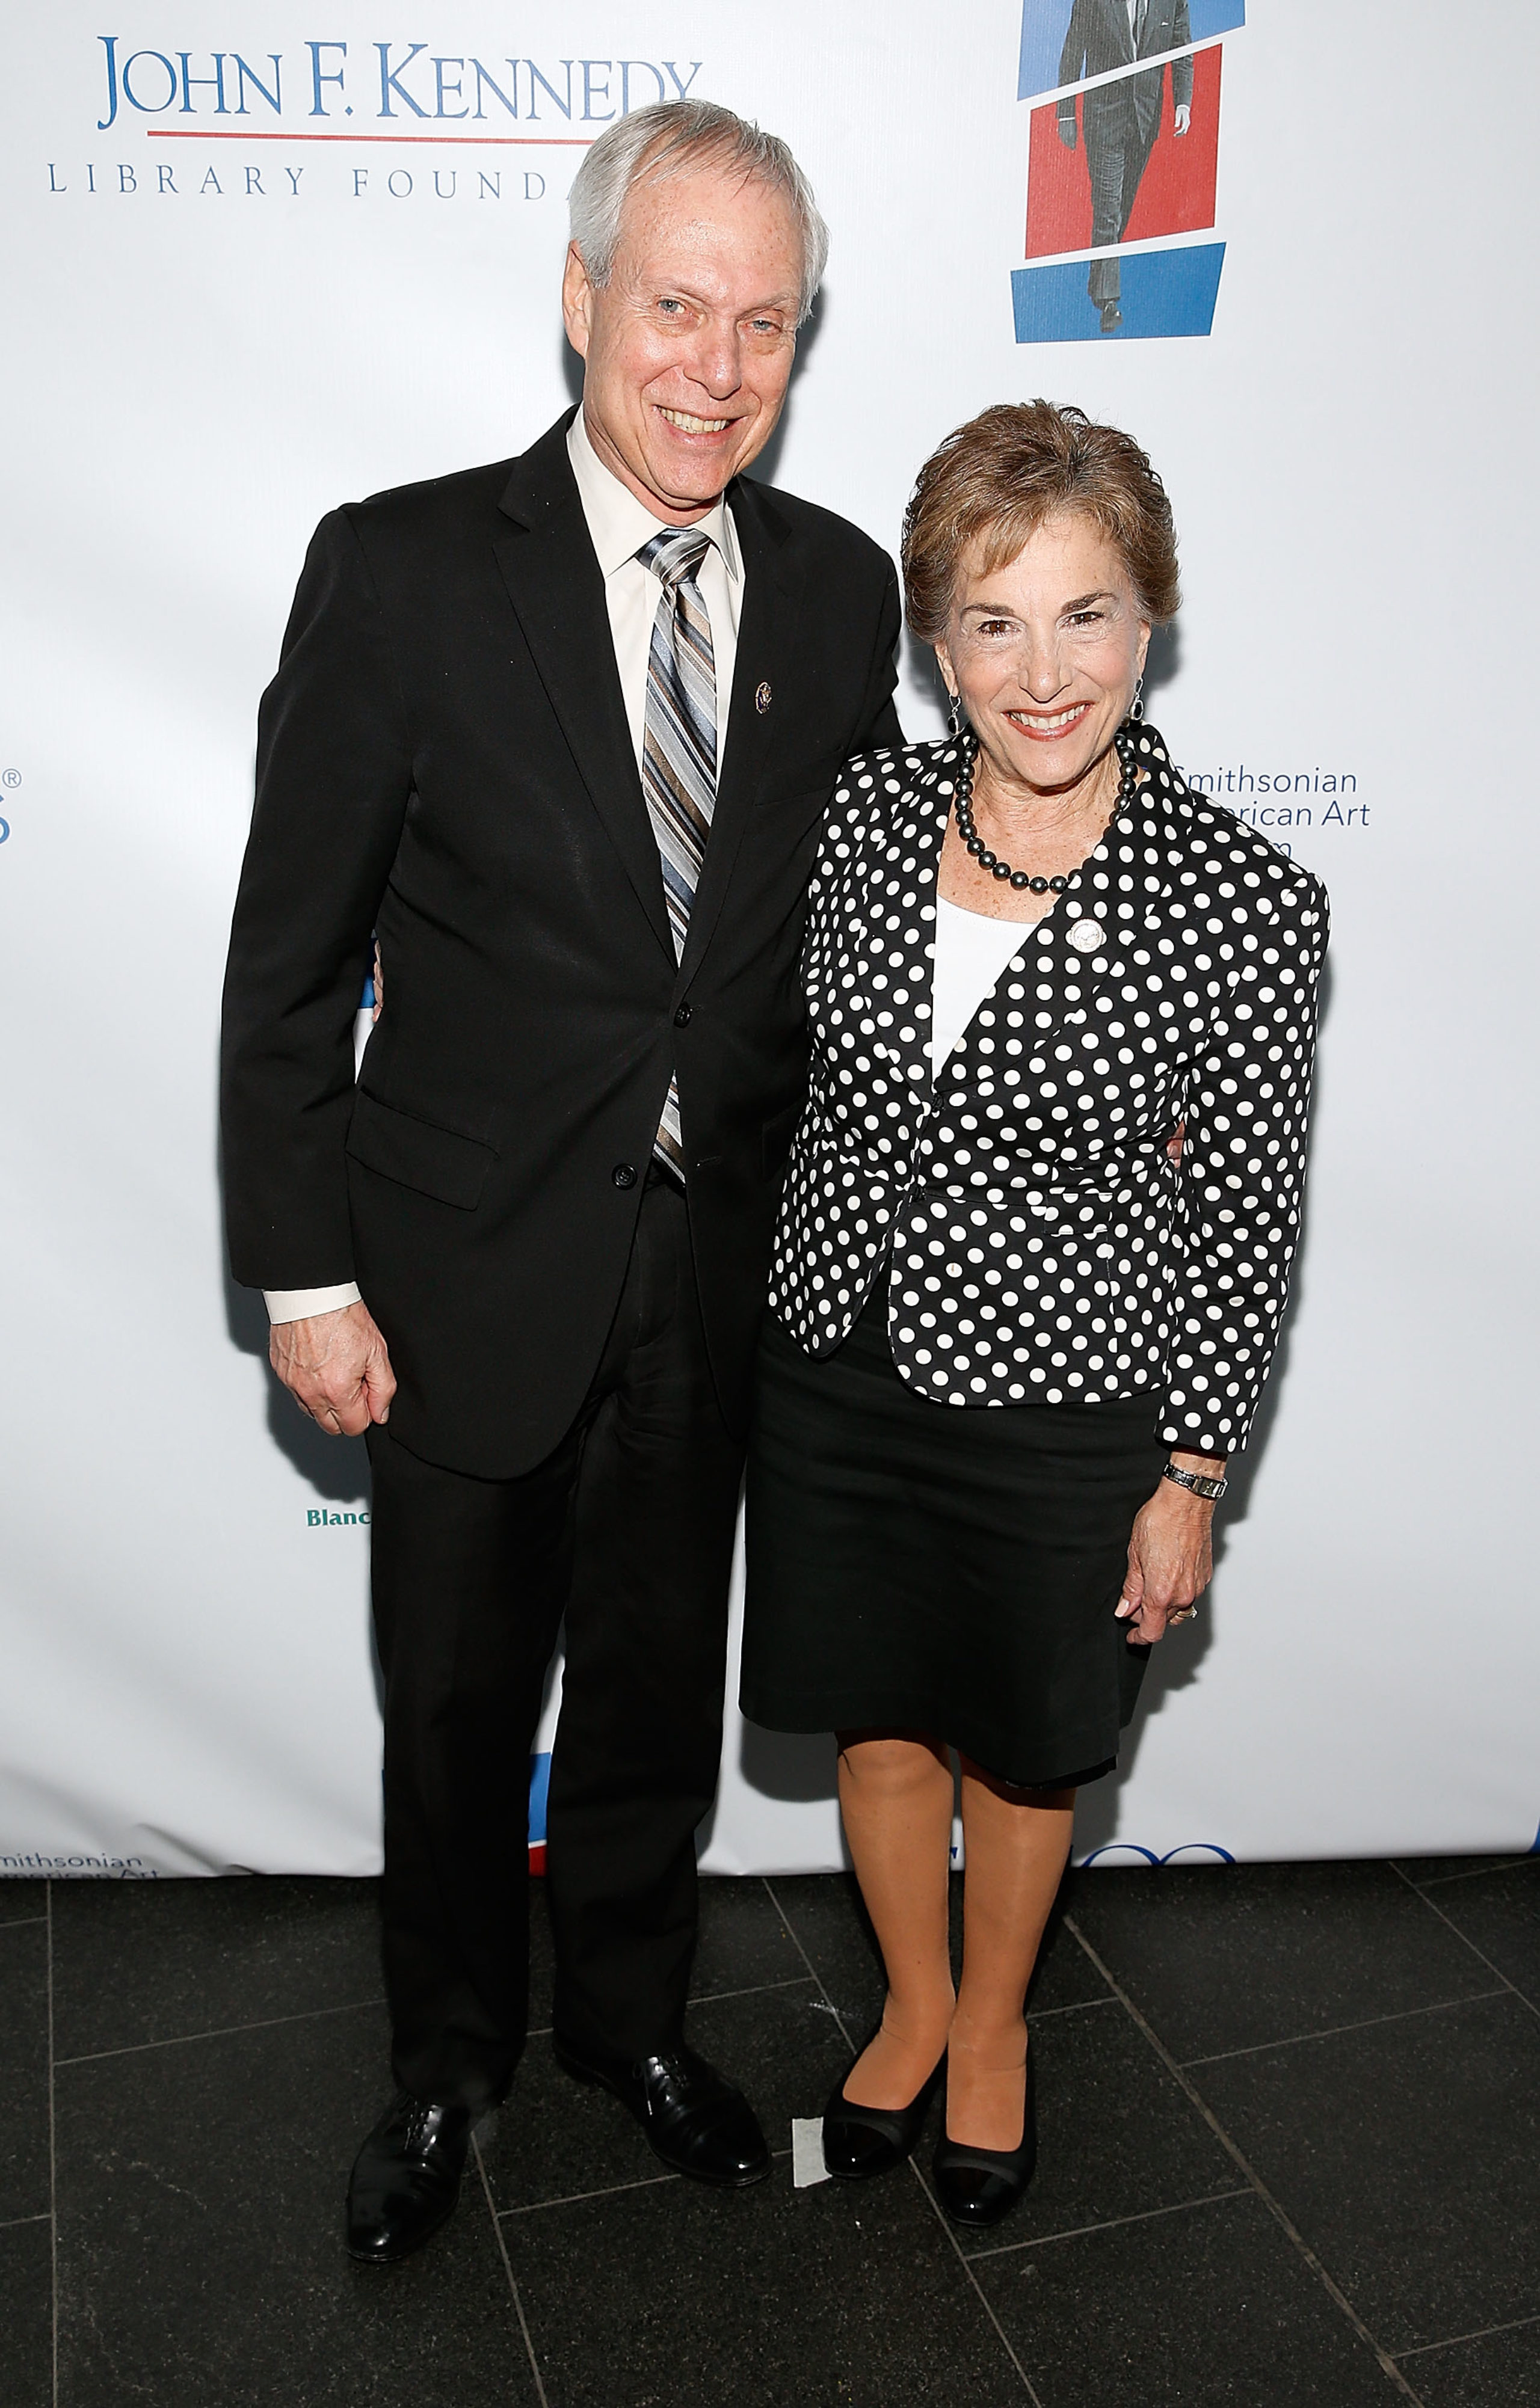 WASHINGTON, DC - MAY 02: Robert Creamer and Rep. Jan Schakowsky (D-IL) arrive at the American Visionary: John F. Kennedy's Life and Times debut gala at Smithsonian American Art Museum on May 2, 2017 in Washington, DC. (Photo by Paul Morigi/Getty Images for WS Productions)